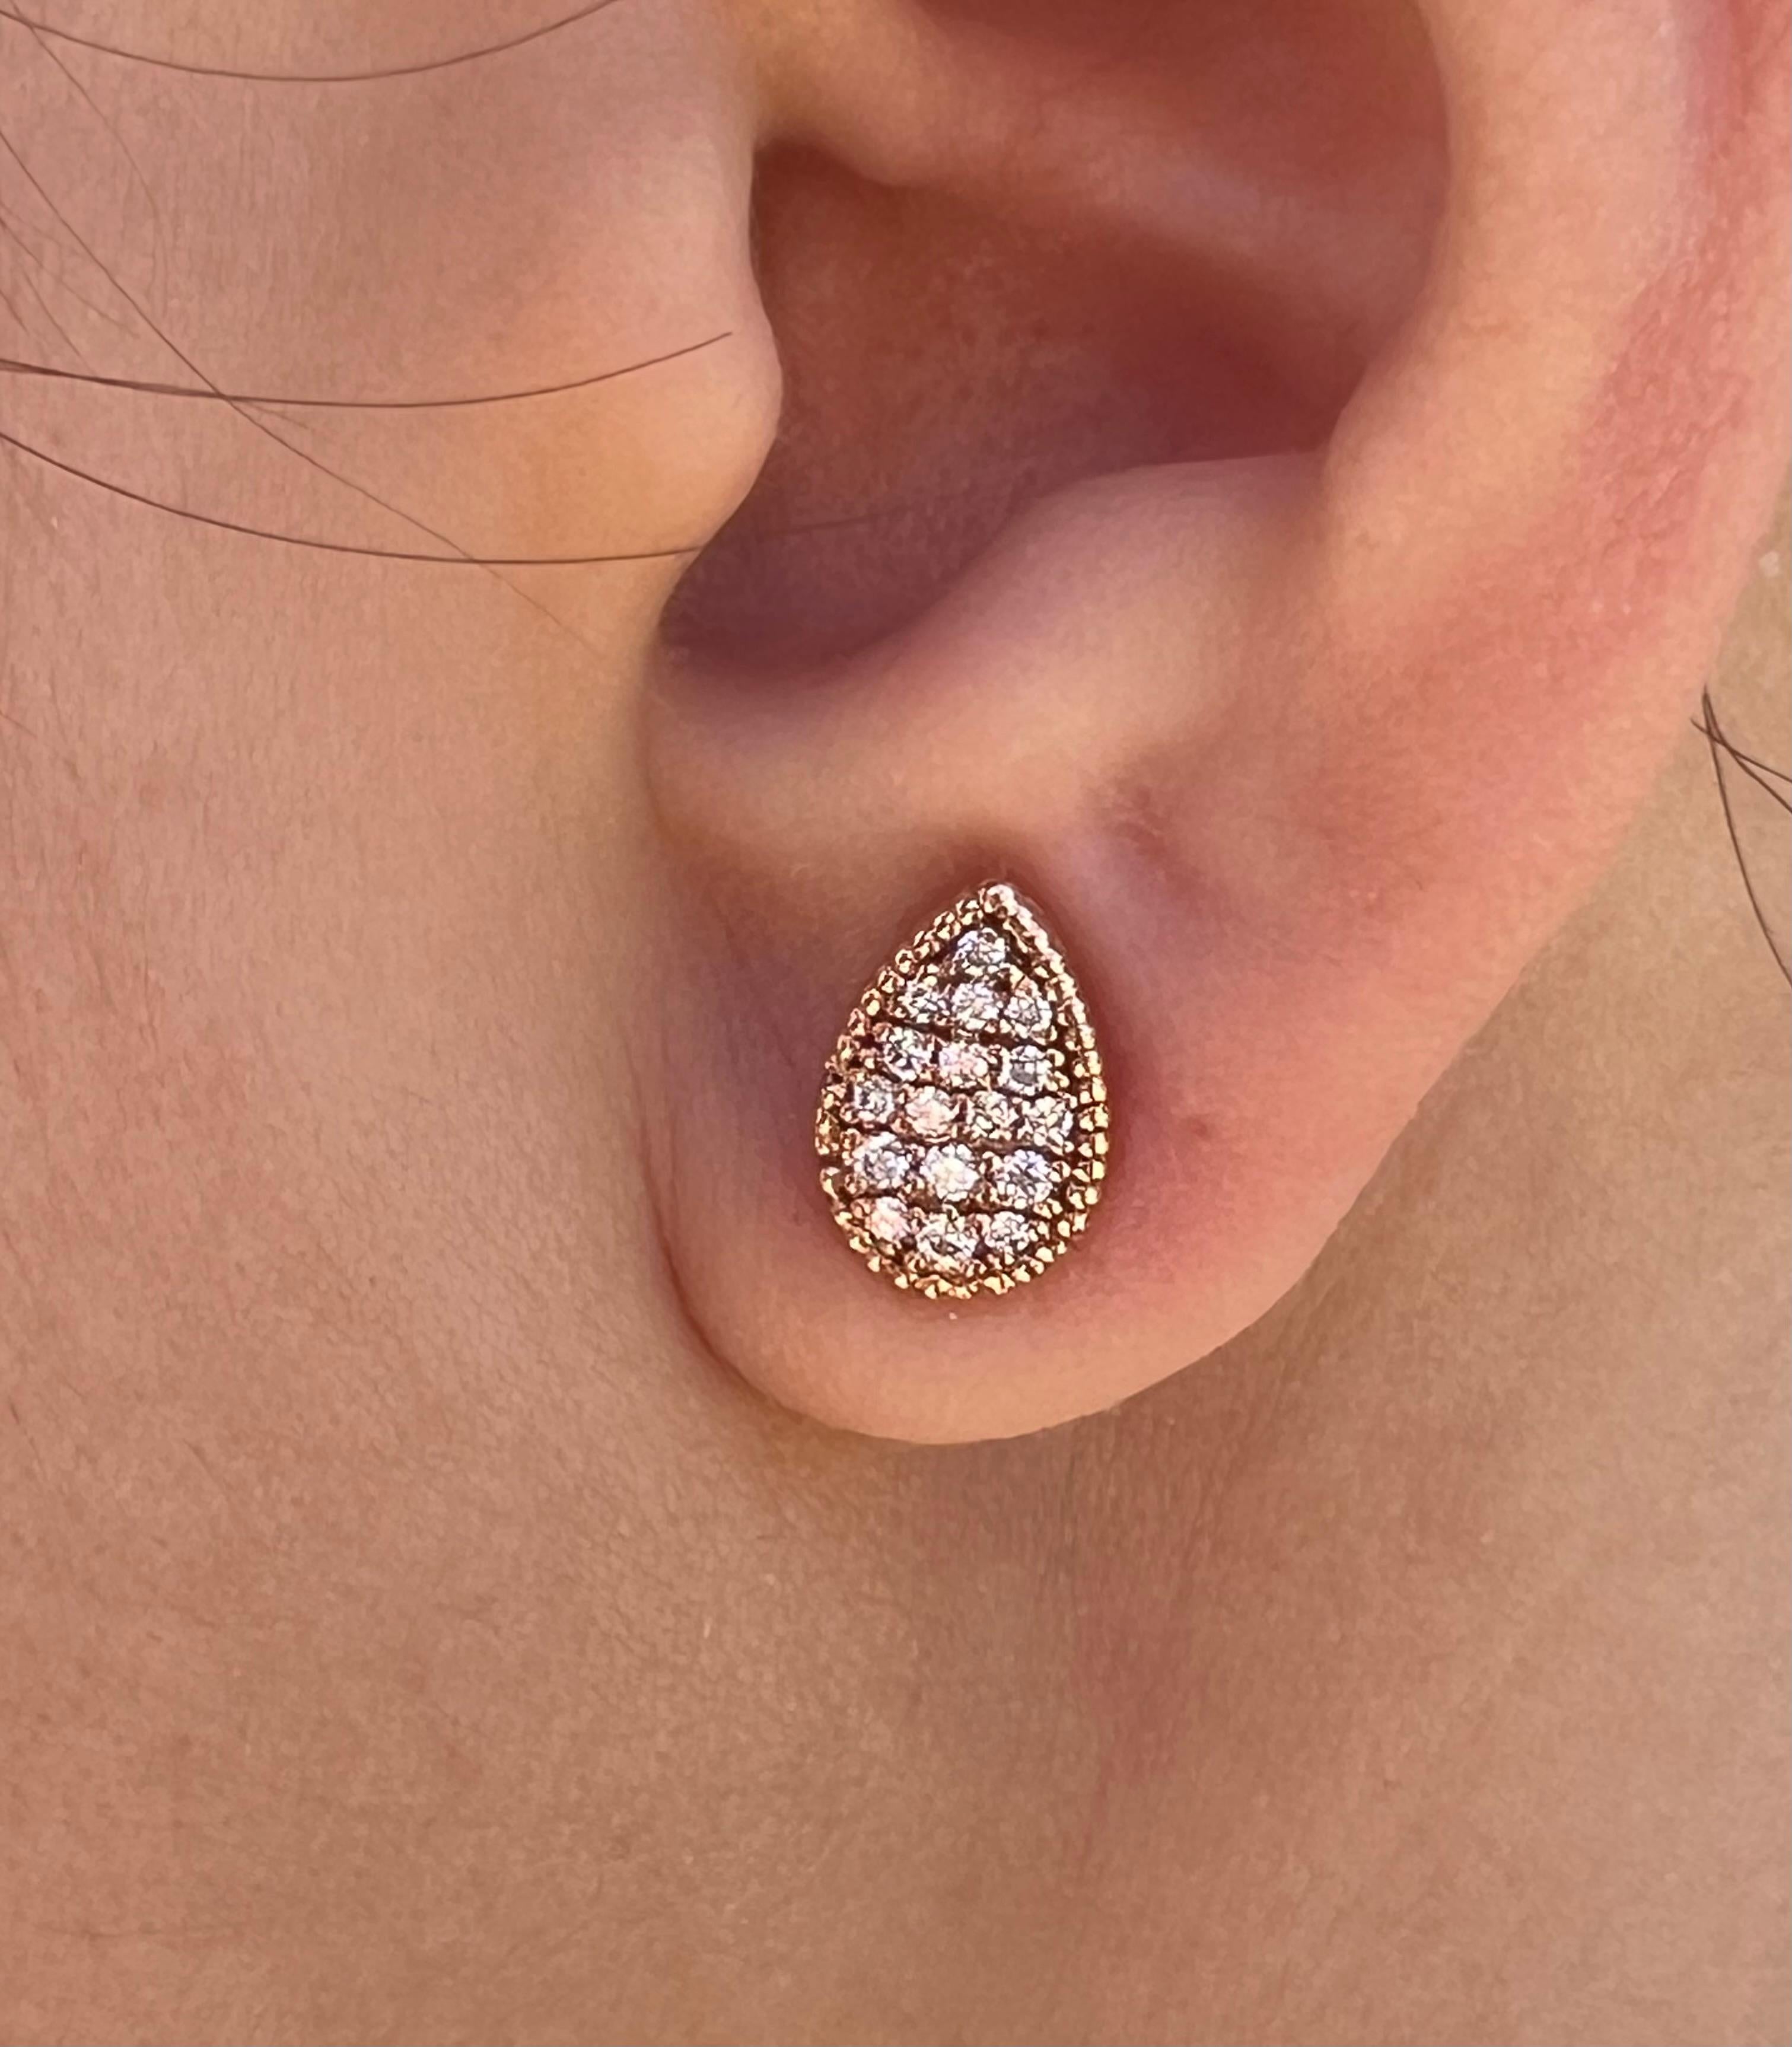 Diamonds are arranged in a drop design, enclosed by gold beads, and their radiance is enhanced by the gleaming surface of the honeycomb. The intricate craftsmanship brings out the flawless brightness of the diamonds. Ideal stud earrings for both